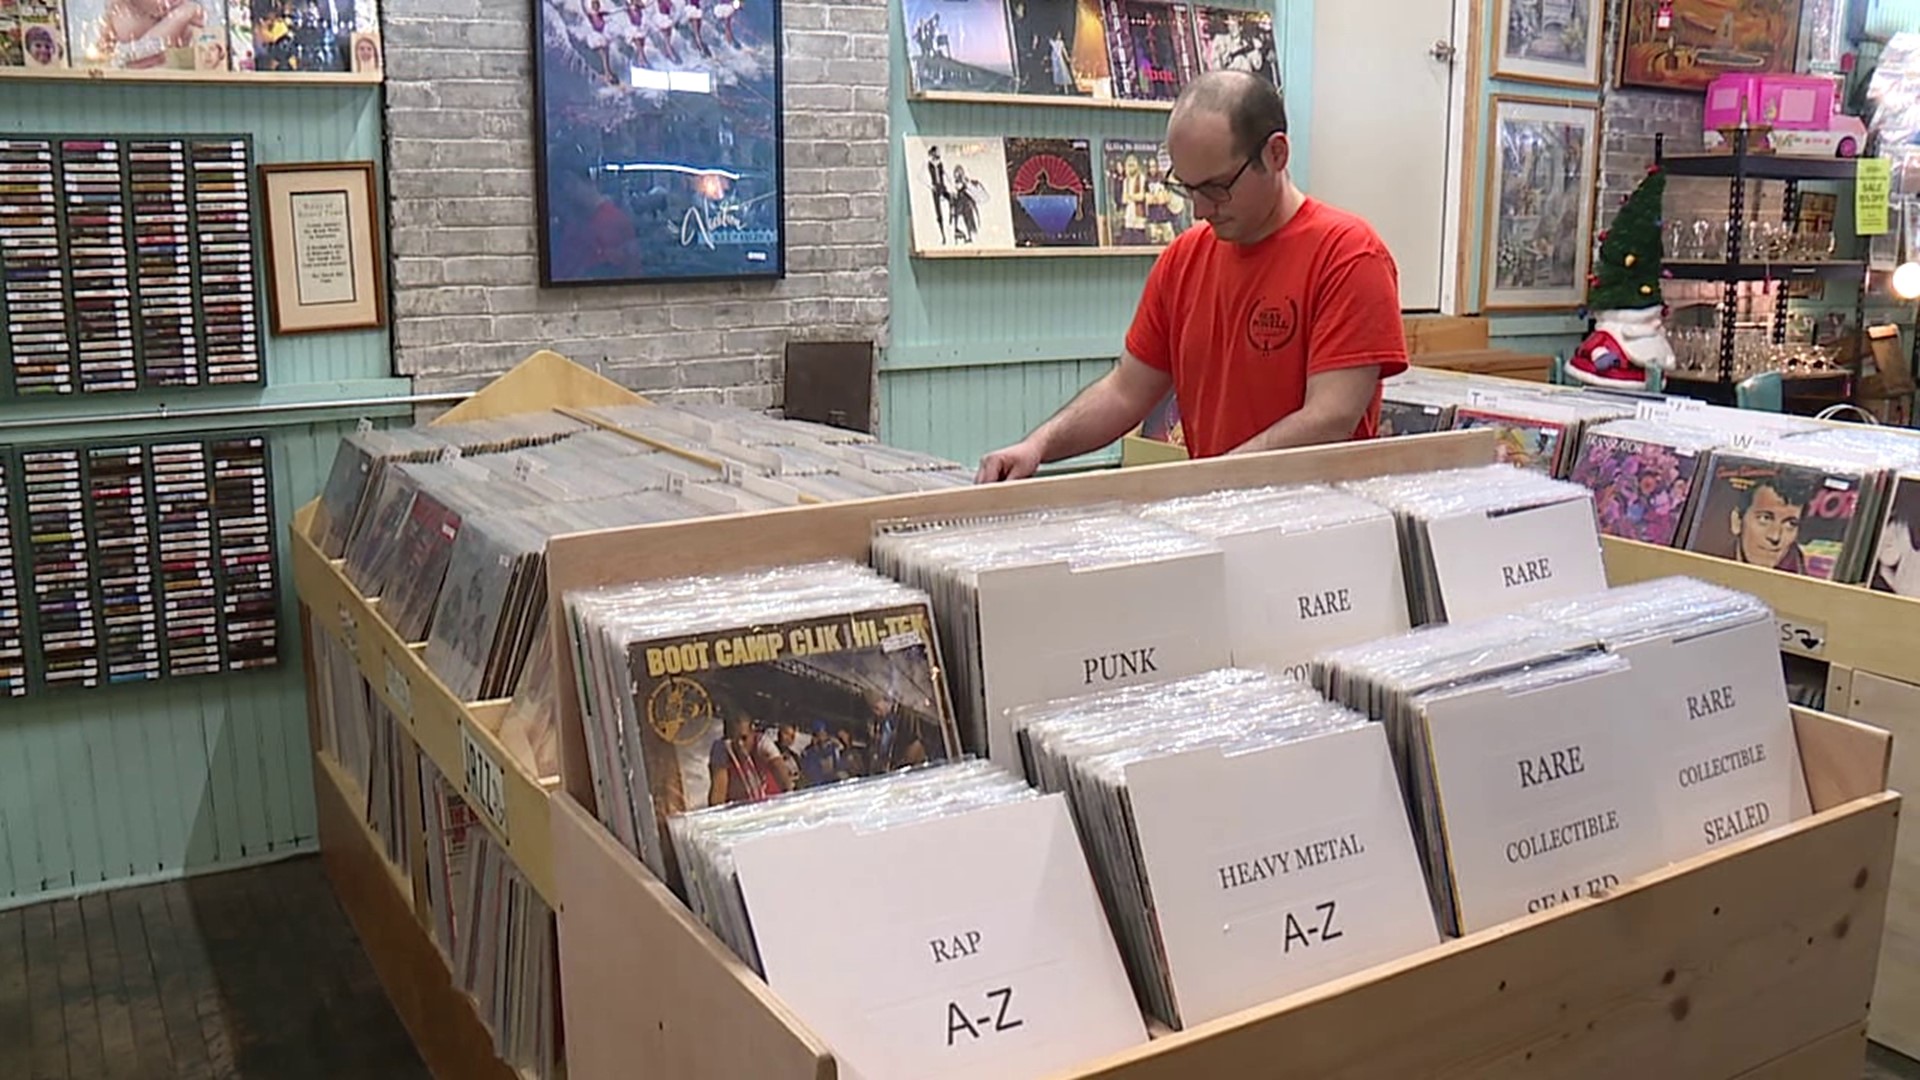 On&On along Capouse Avenue has created a section of their store just for records called Recordtown.